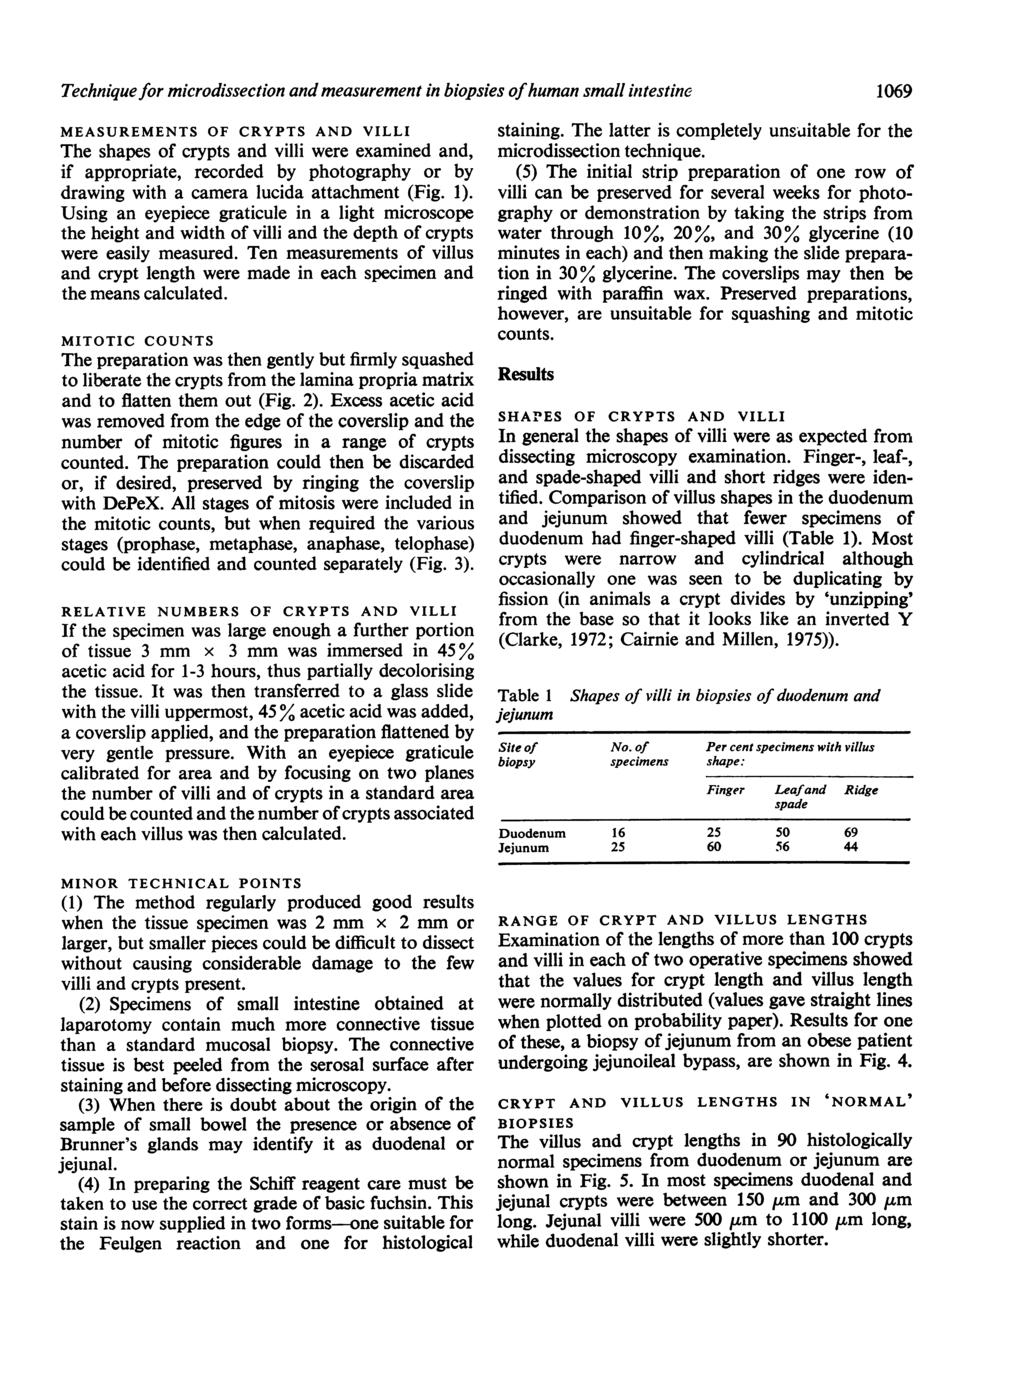 Technique for microdissection and measurement in biopsies ofhuman small intestinc MEASUREMENTS OF CRYPTS AND VILLI The shapes of crypts and villi were examined and, if appropriate, recorded by